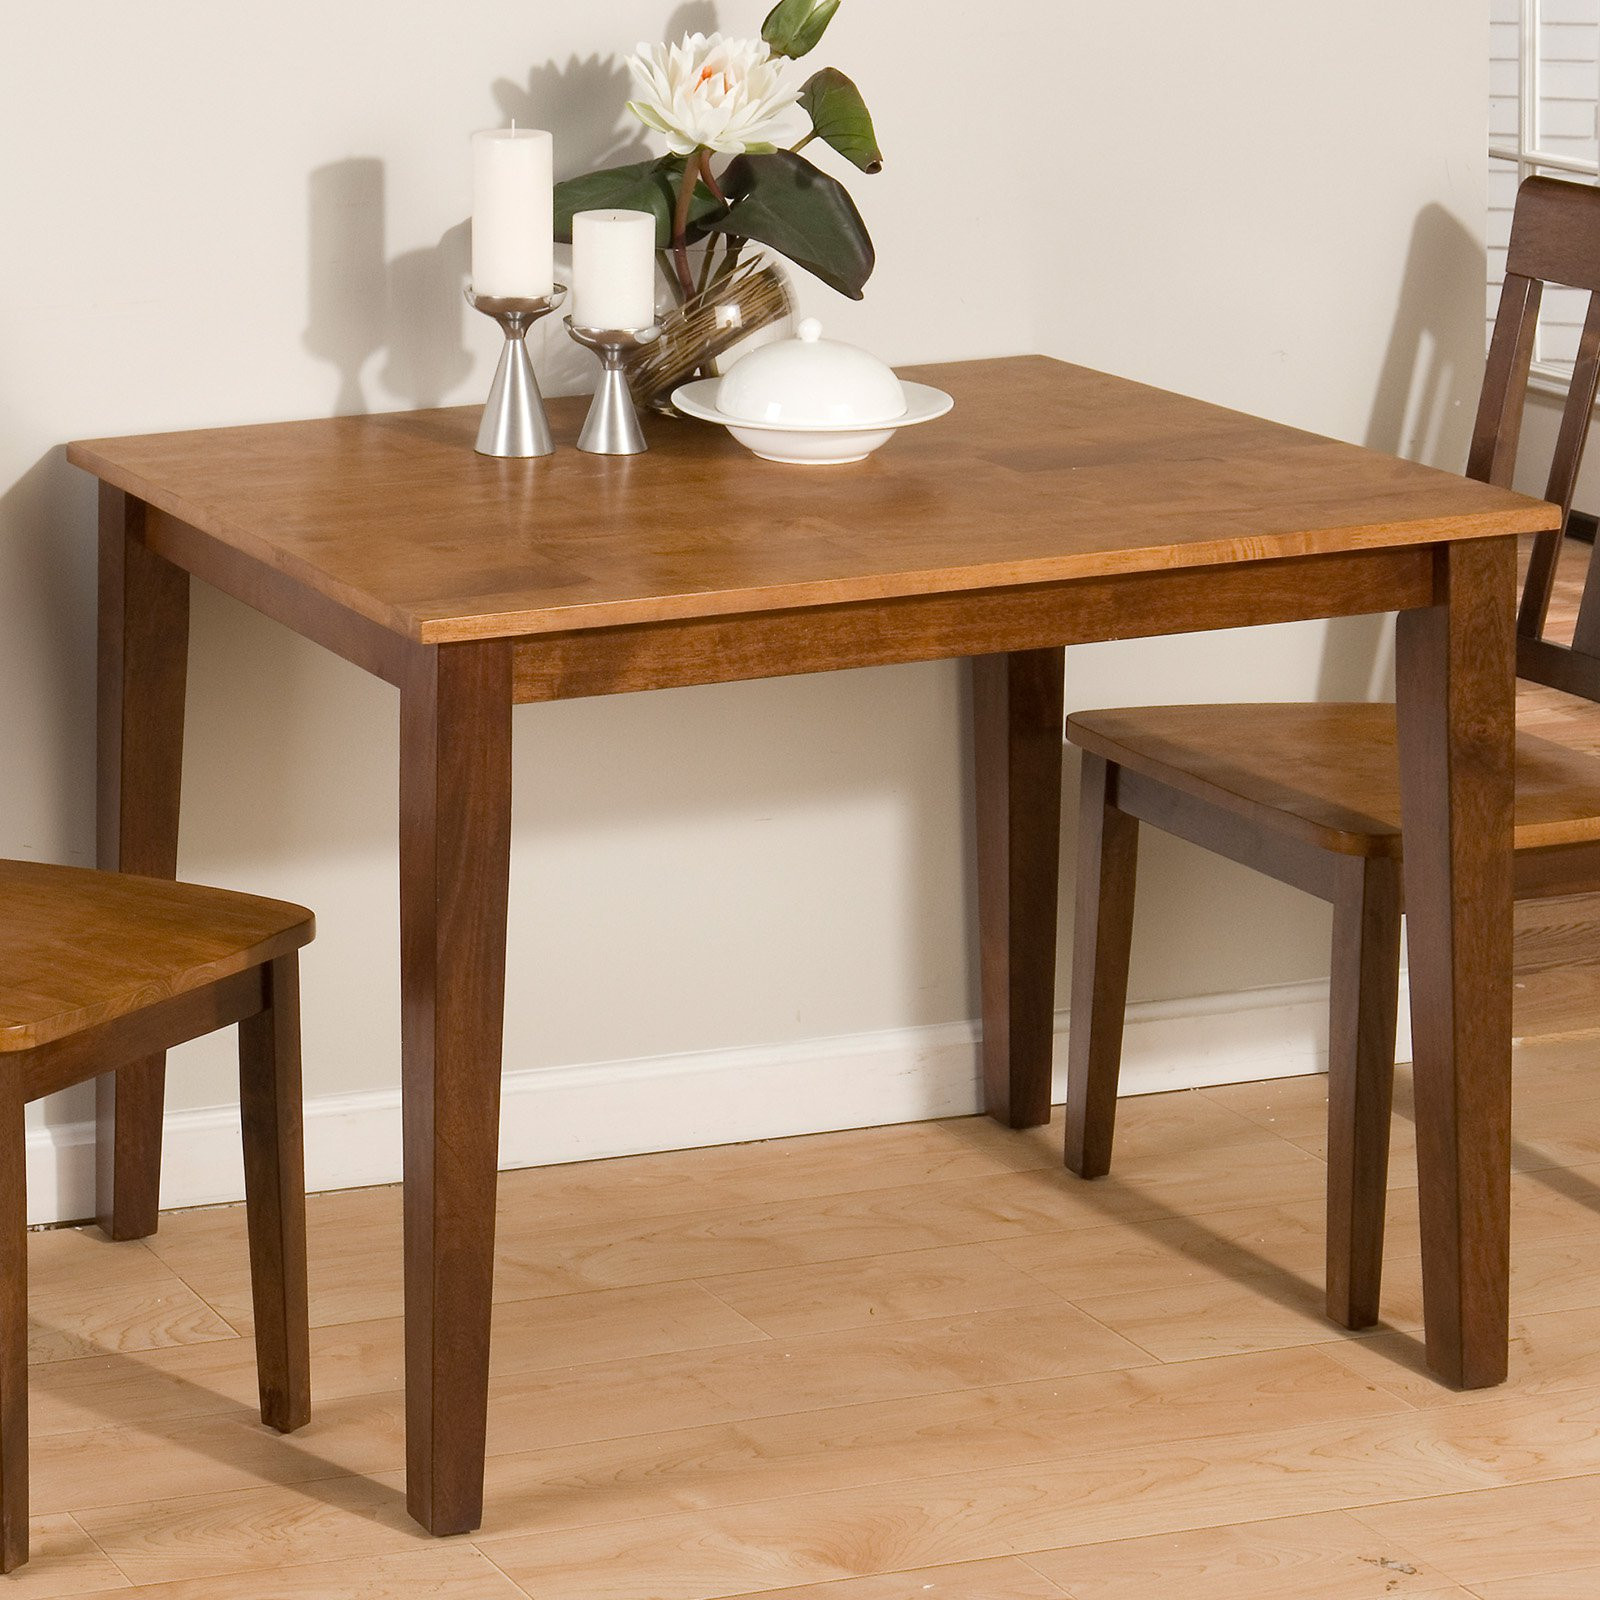 Small Tables For Kitchen
 Small Rectangular Kitchen Table – HomesFeed